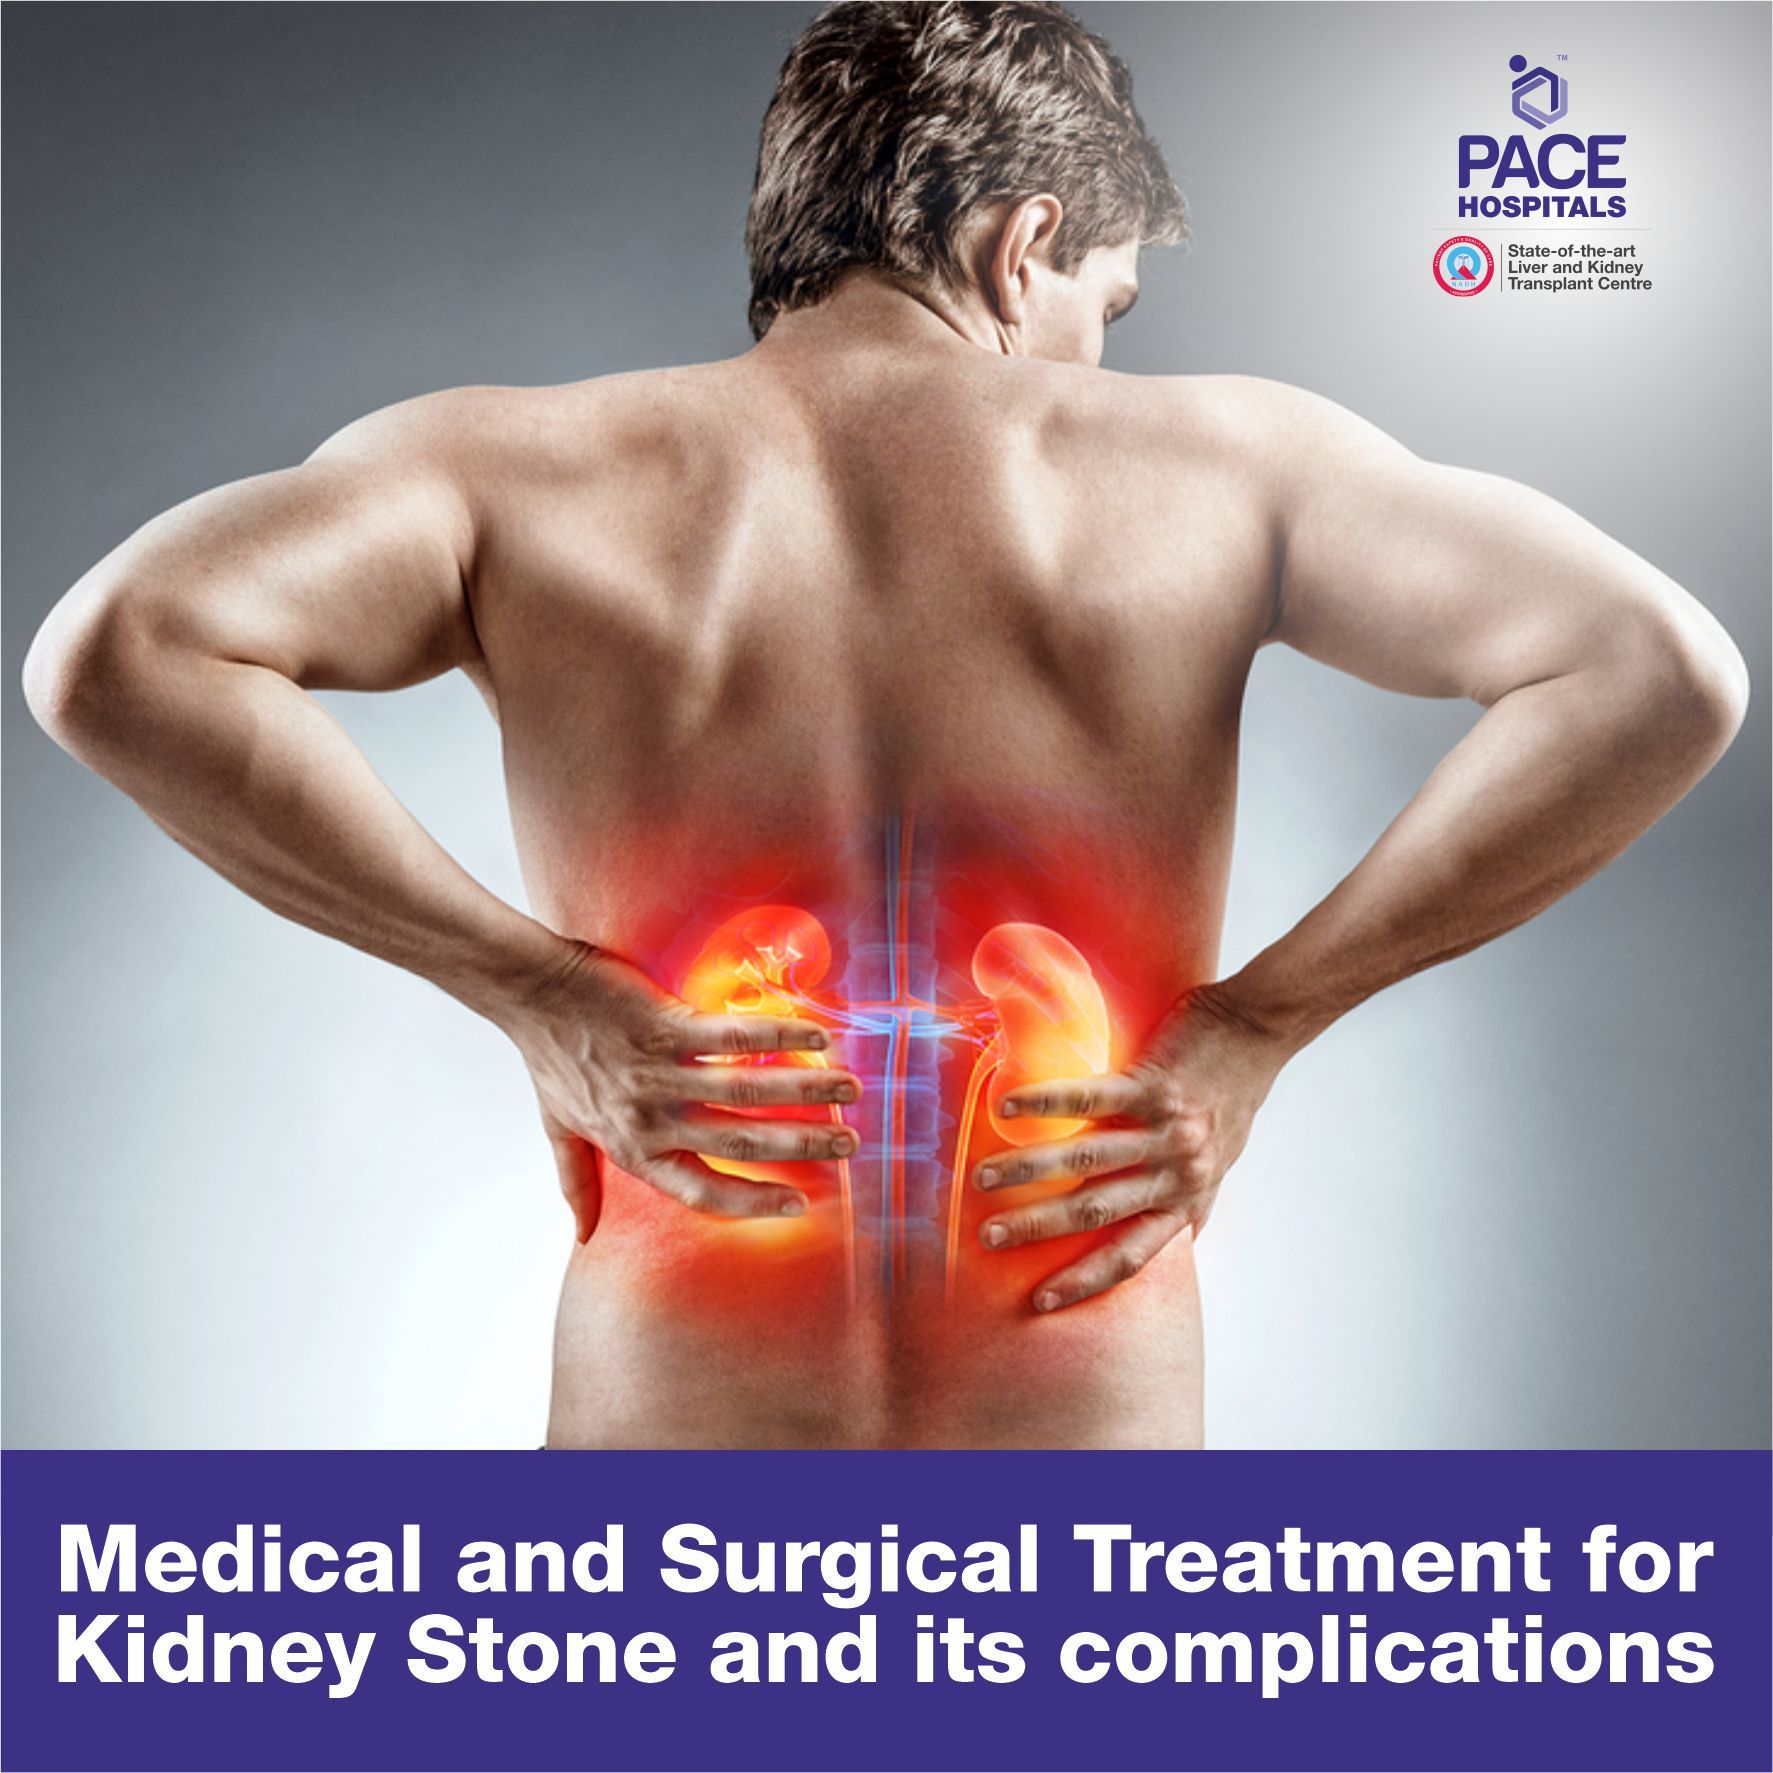 Medical and Surgical Treatment for Kidney Stone and its complications